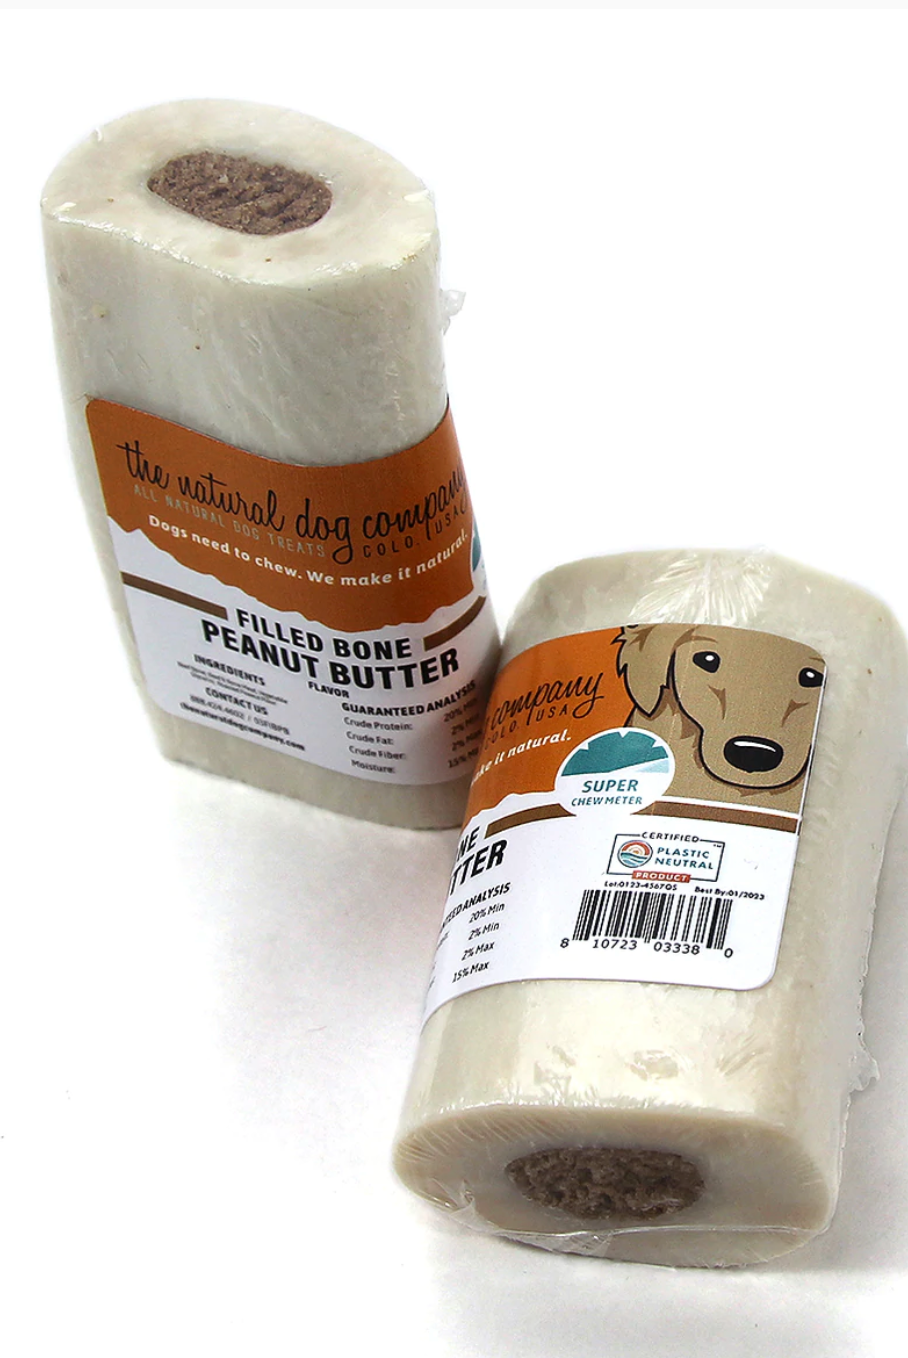 Tuesday's Natural Dog Company 3" Filled Bone - Peanut Butter Flavor